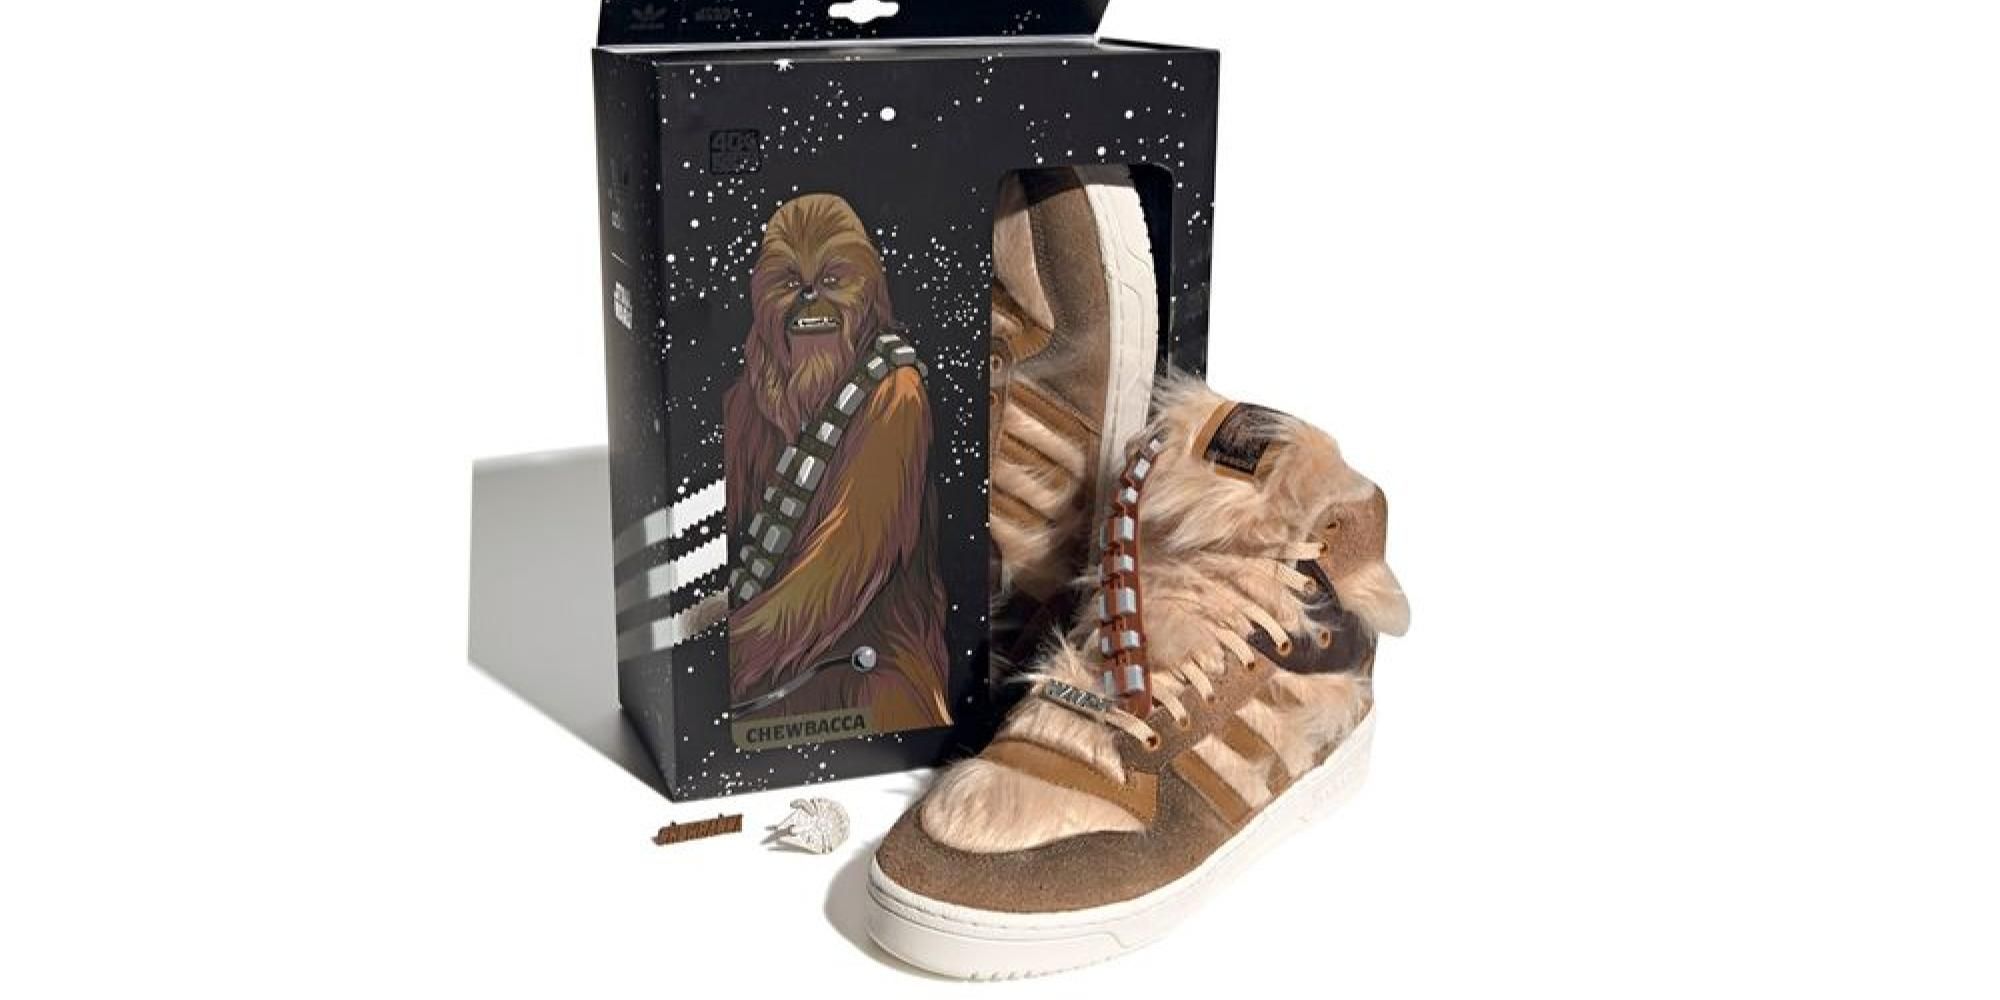 Chewbacca themed shoes